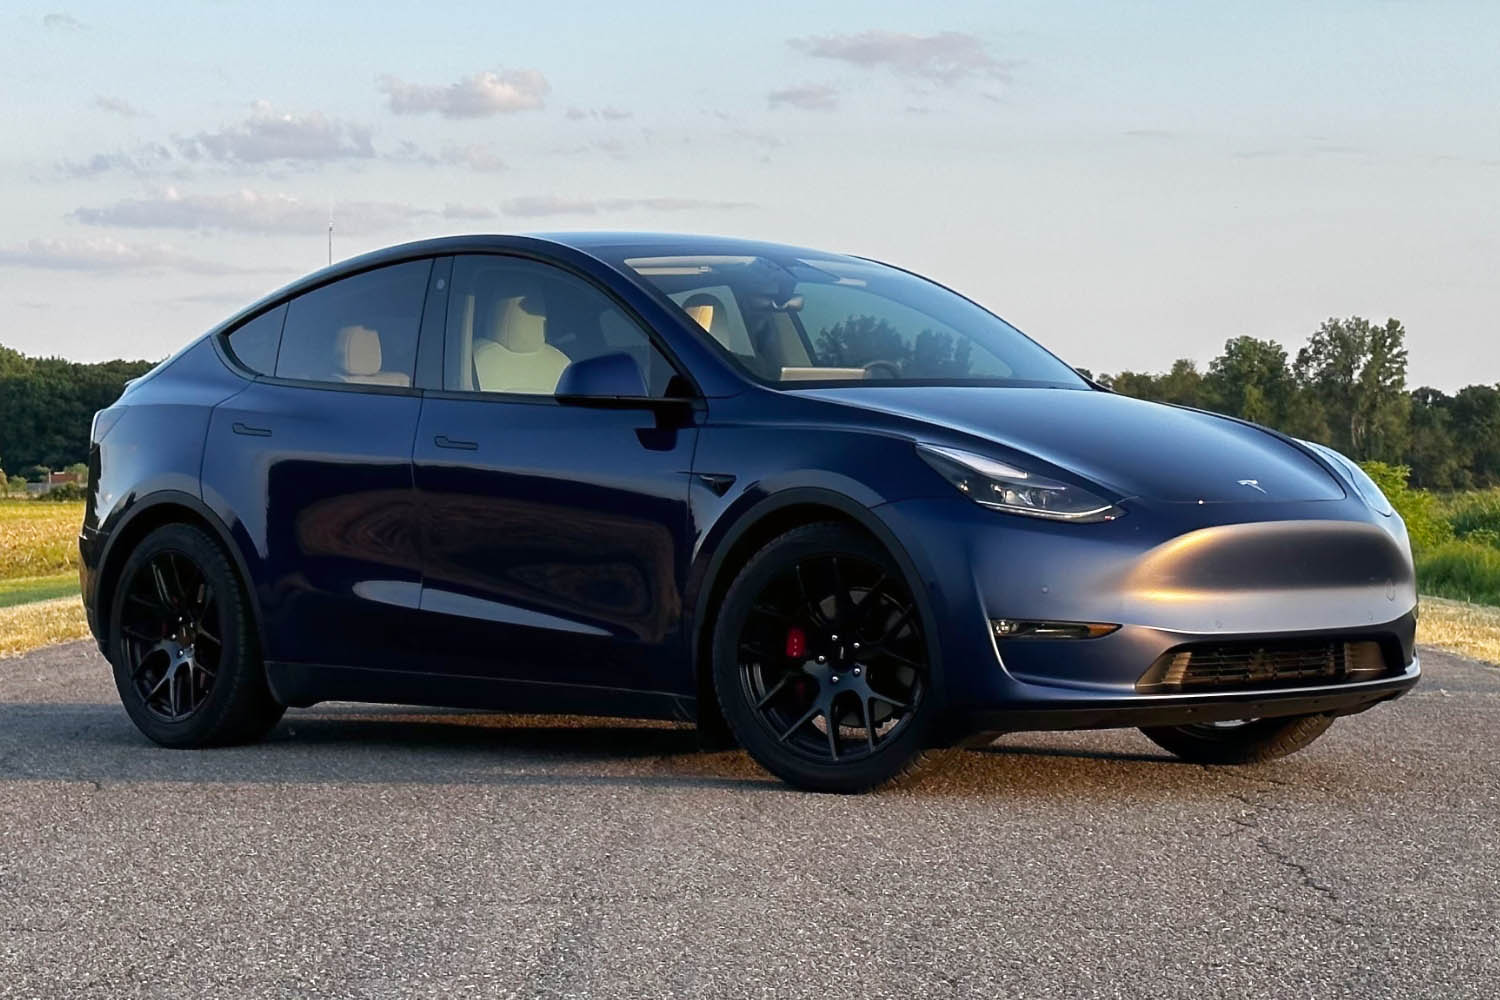  Front three-quarter view of a 2023 Tesla Model Y in dark blue on pavement.